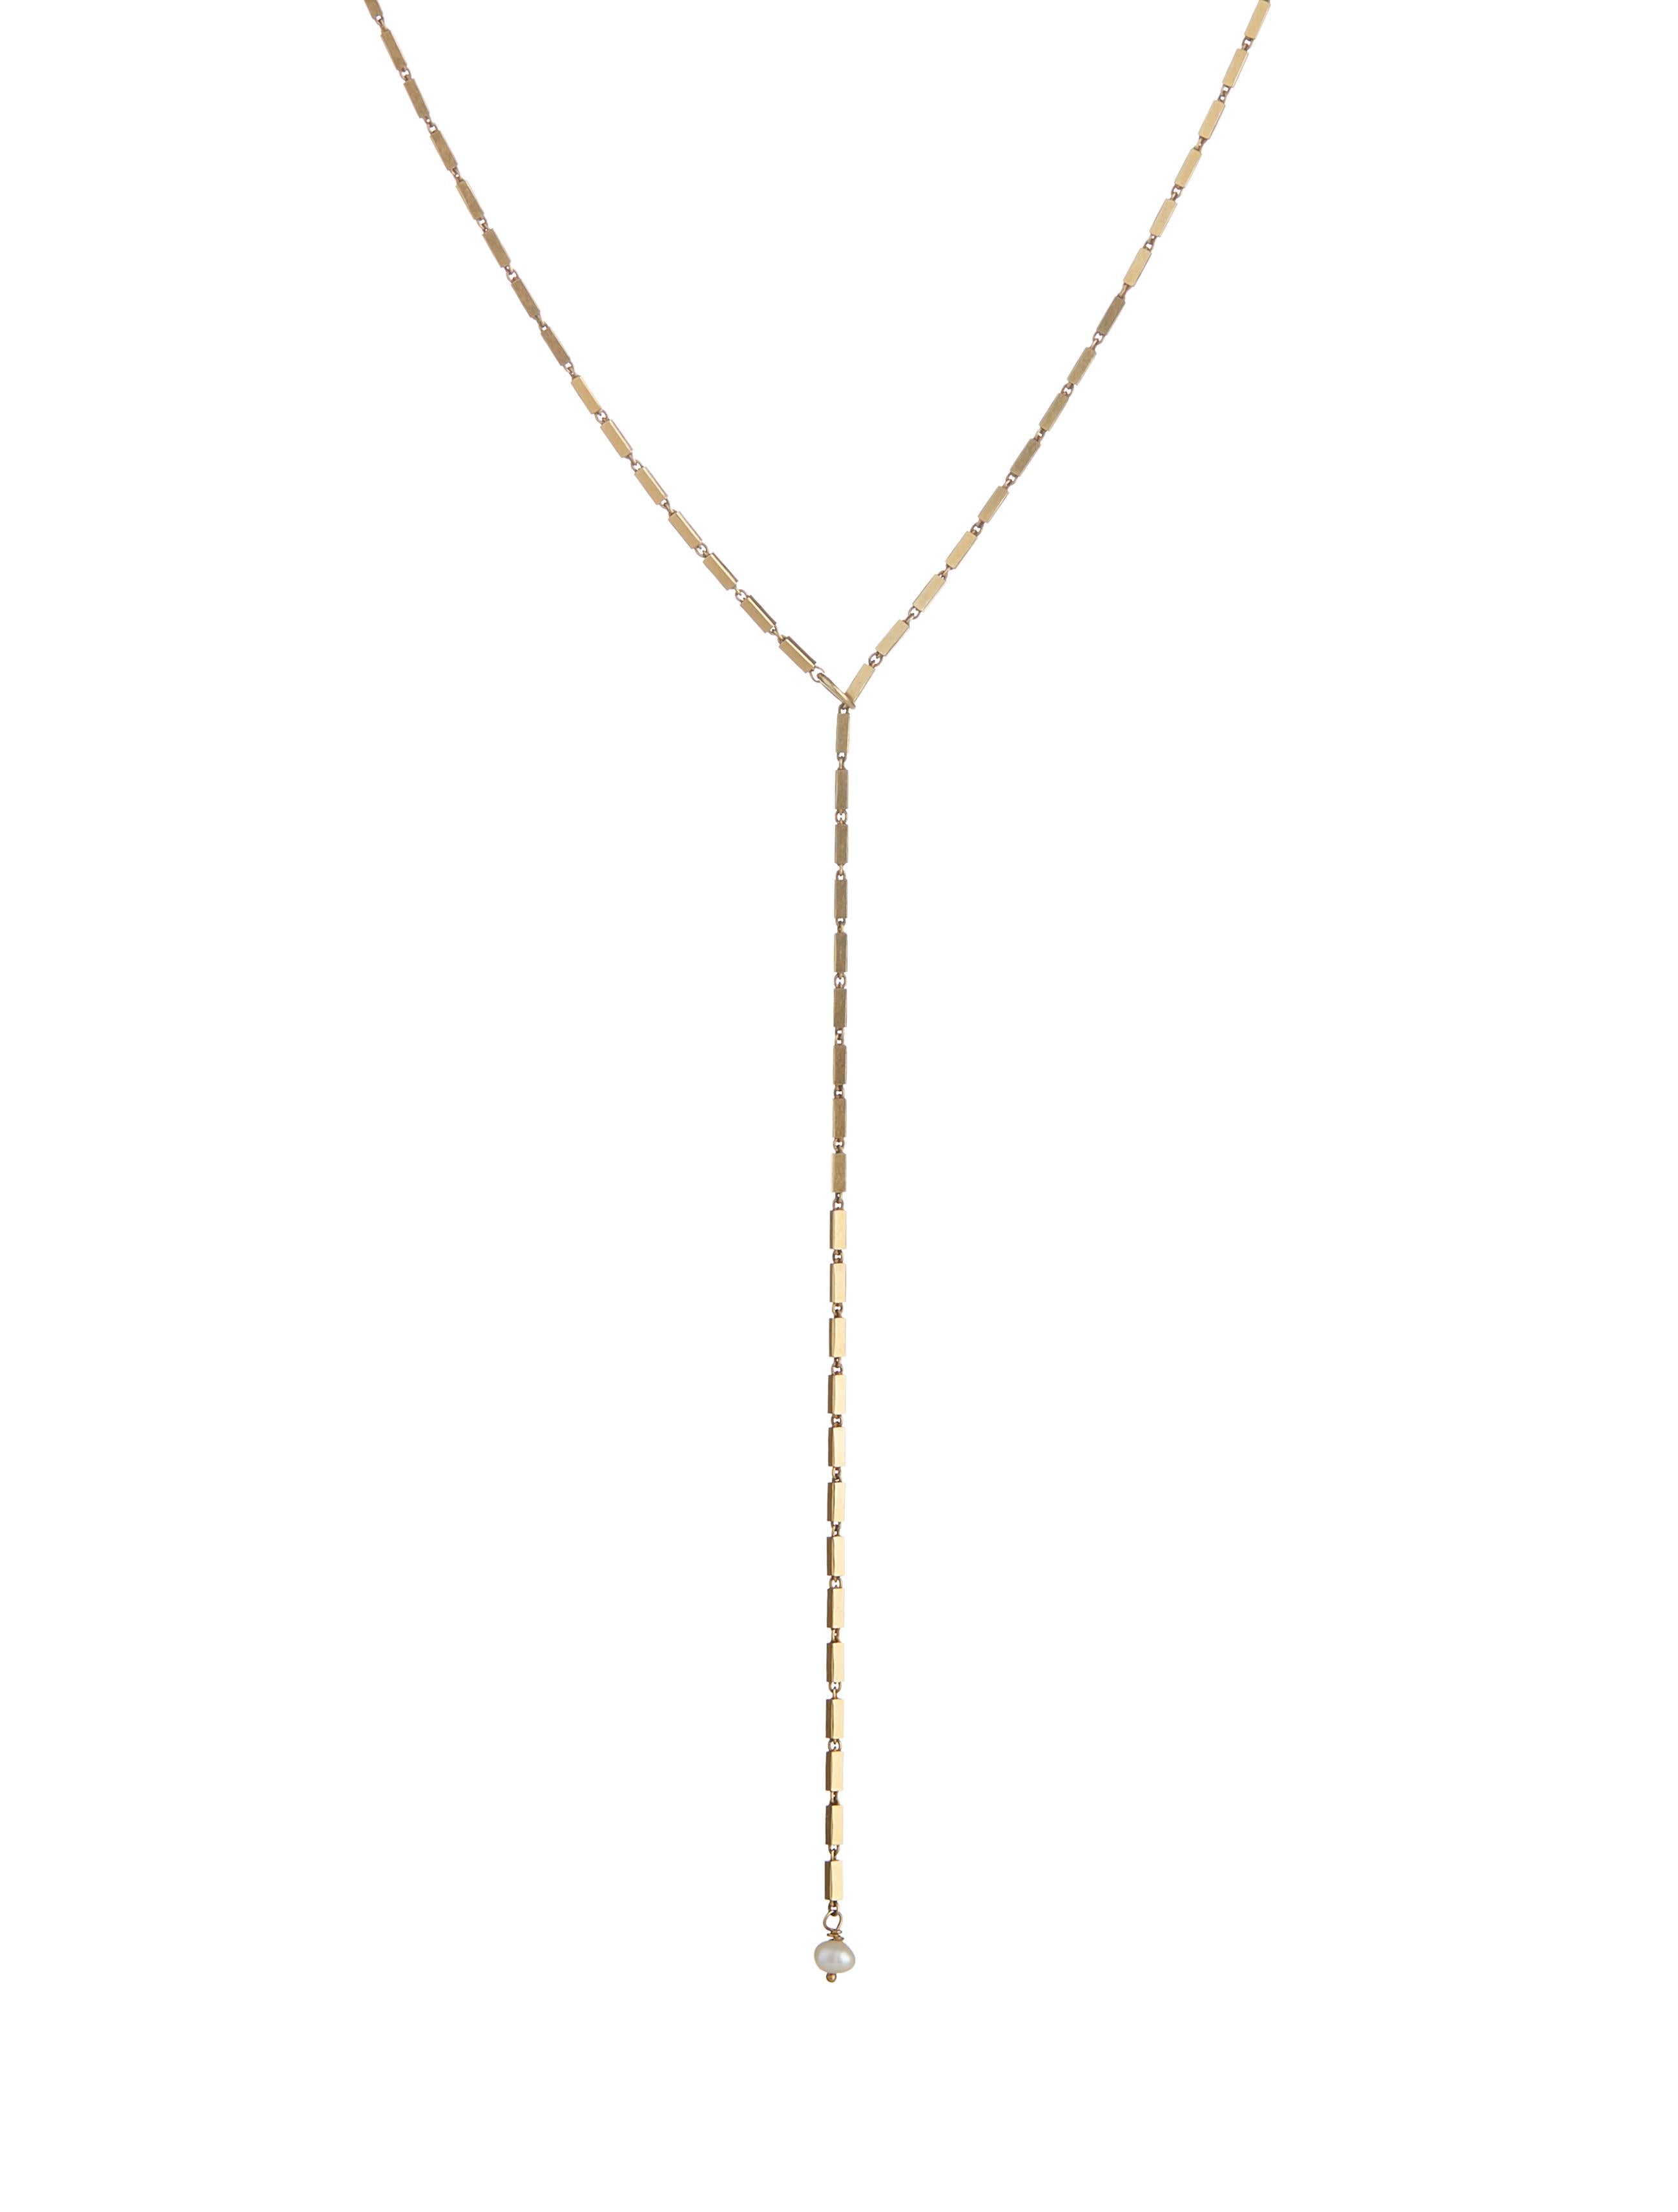 70cm timeless Gold plated sterling silver chain that consists of rectangular motifs linked to each with a pearl ending . This piece is adjustable and can be worn as a lariat and as a necklace. Suits all types of styles and occasions.  Every piece is